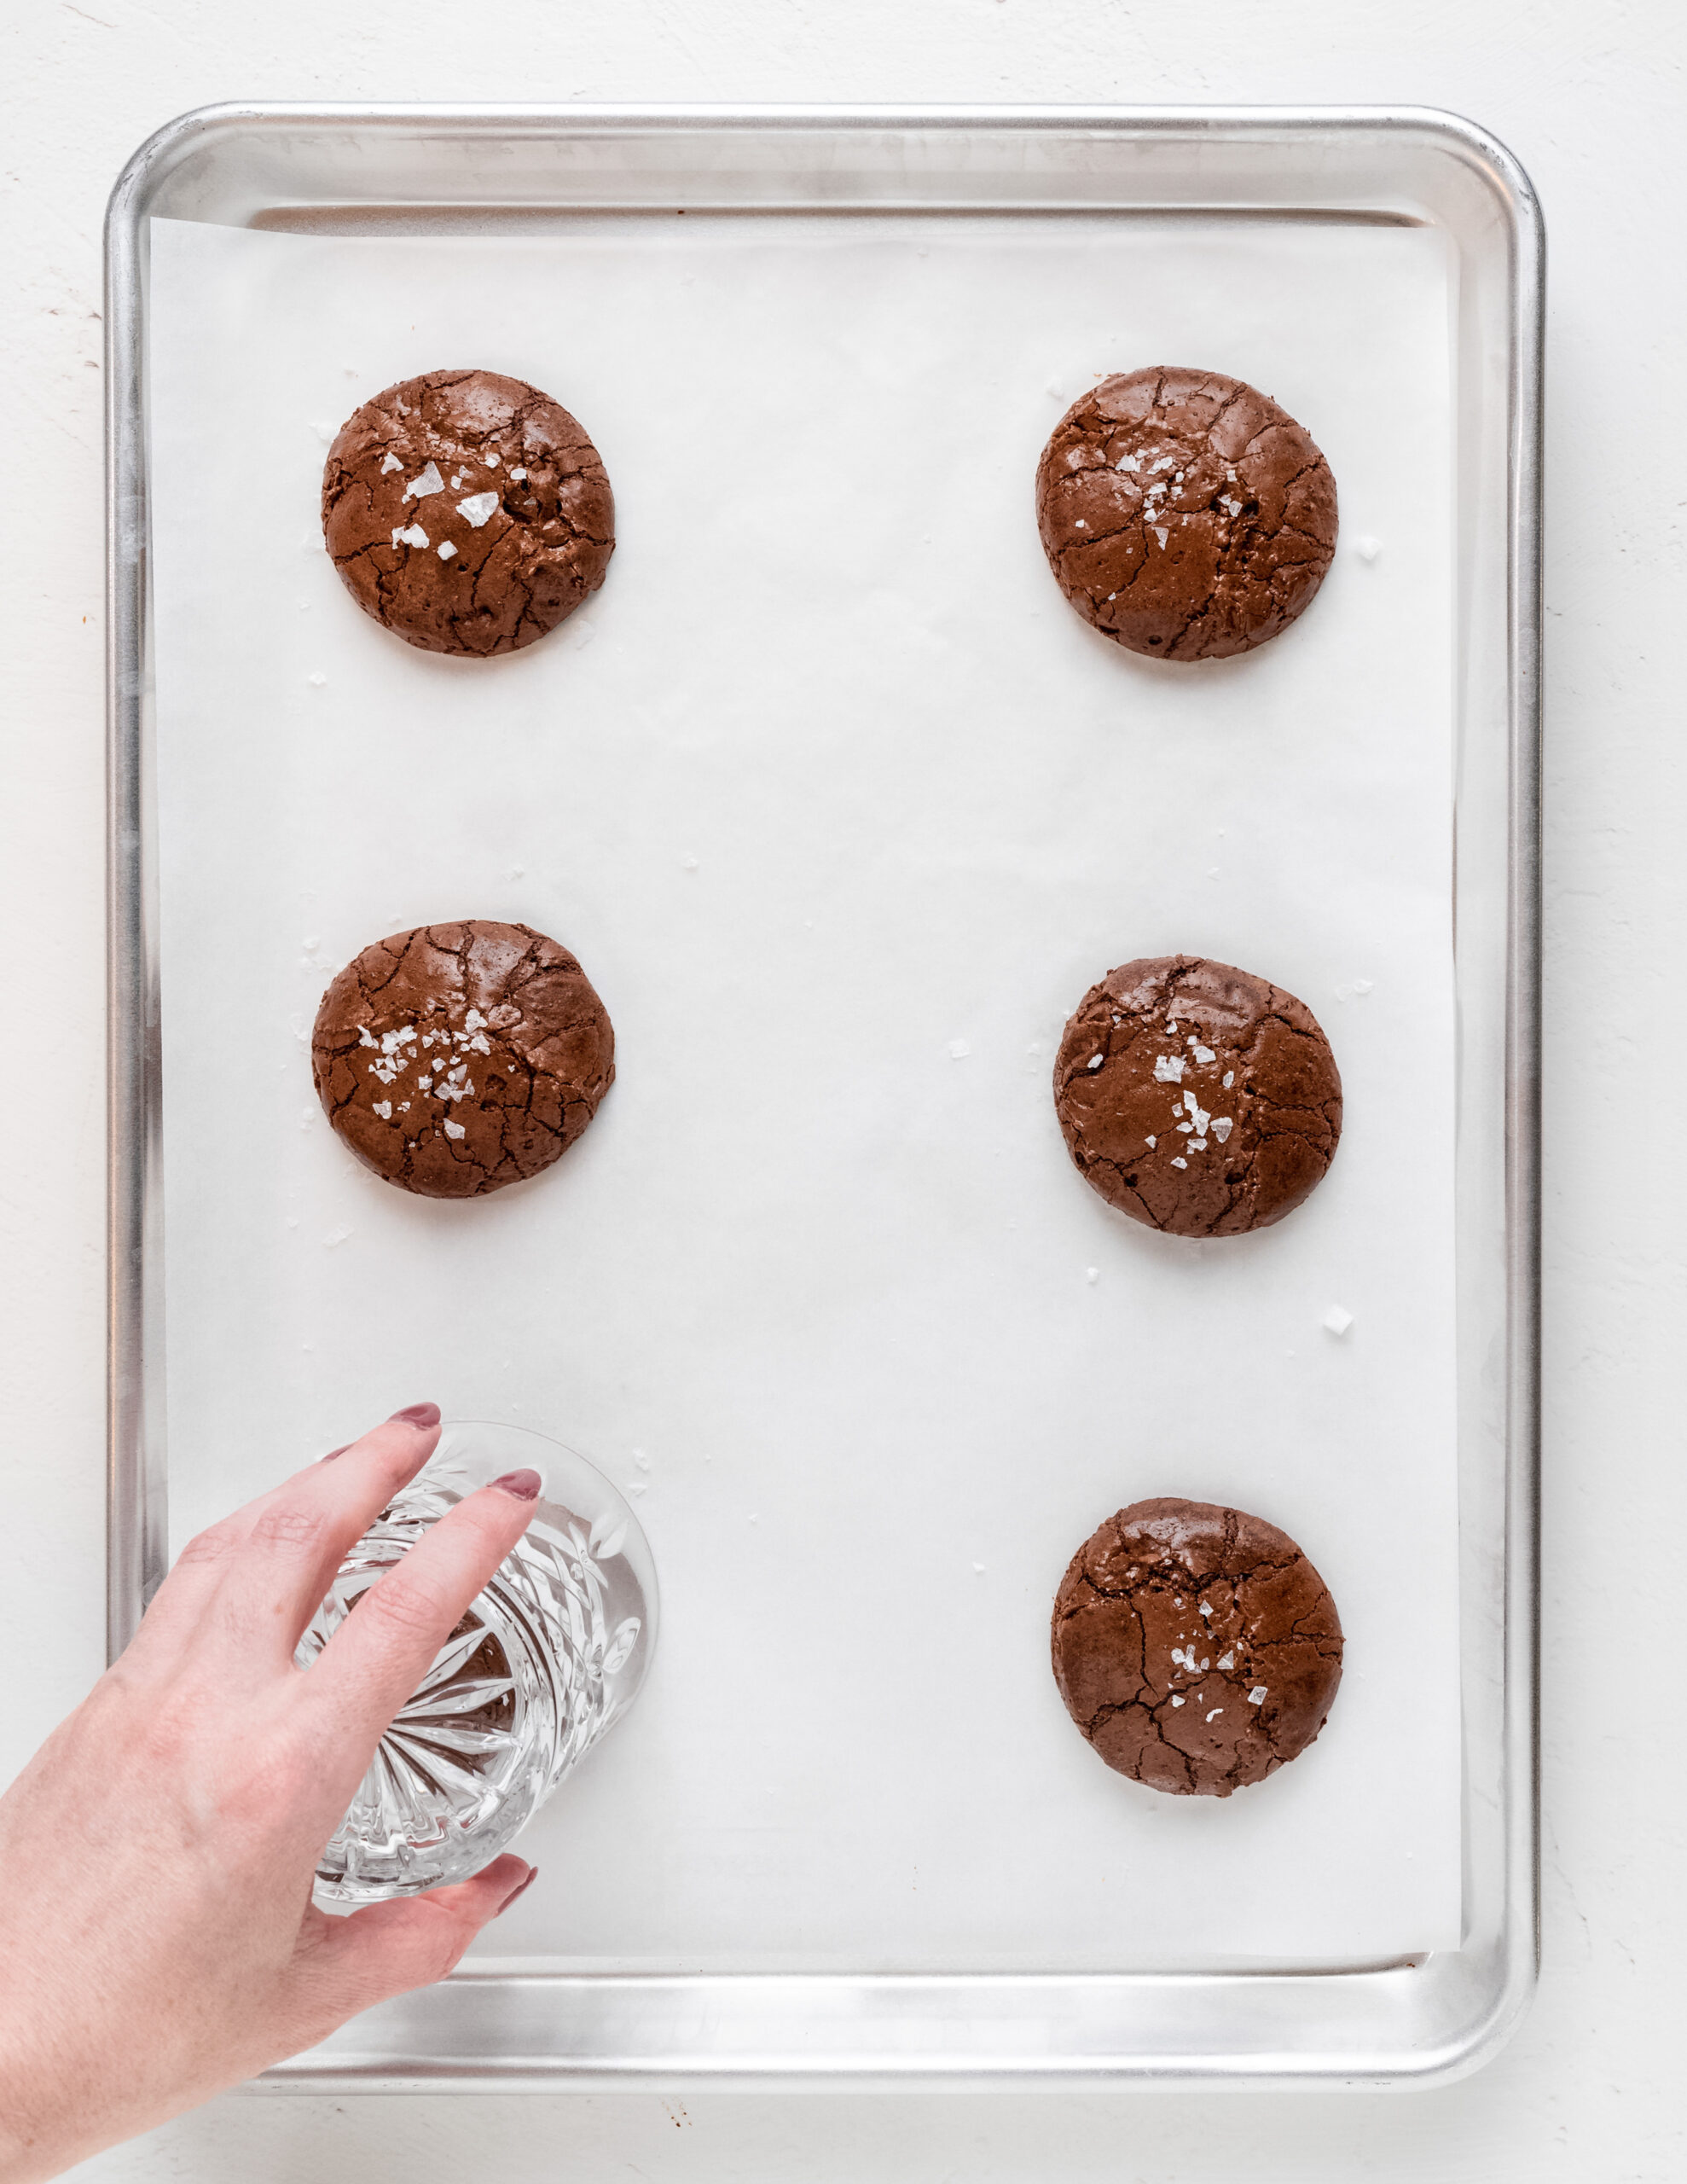 A finished product of 6 chocolate brownie cookies on a silver baking tray, lined with parchment paper. There's a visible hand with a glass over the top of one cookie, moving in a circular motion to create perfect roundness.